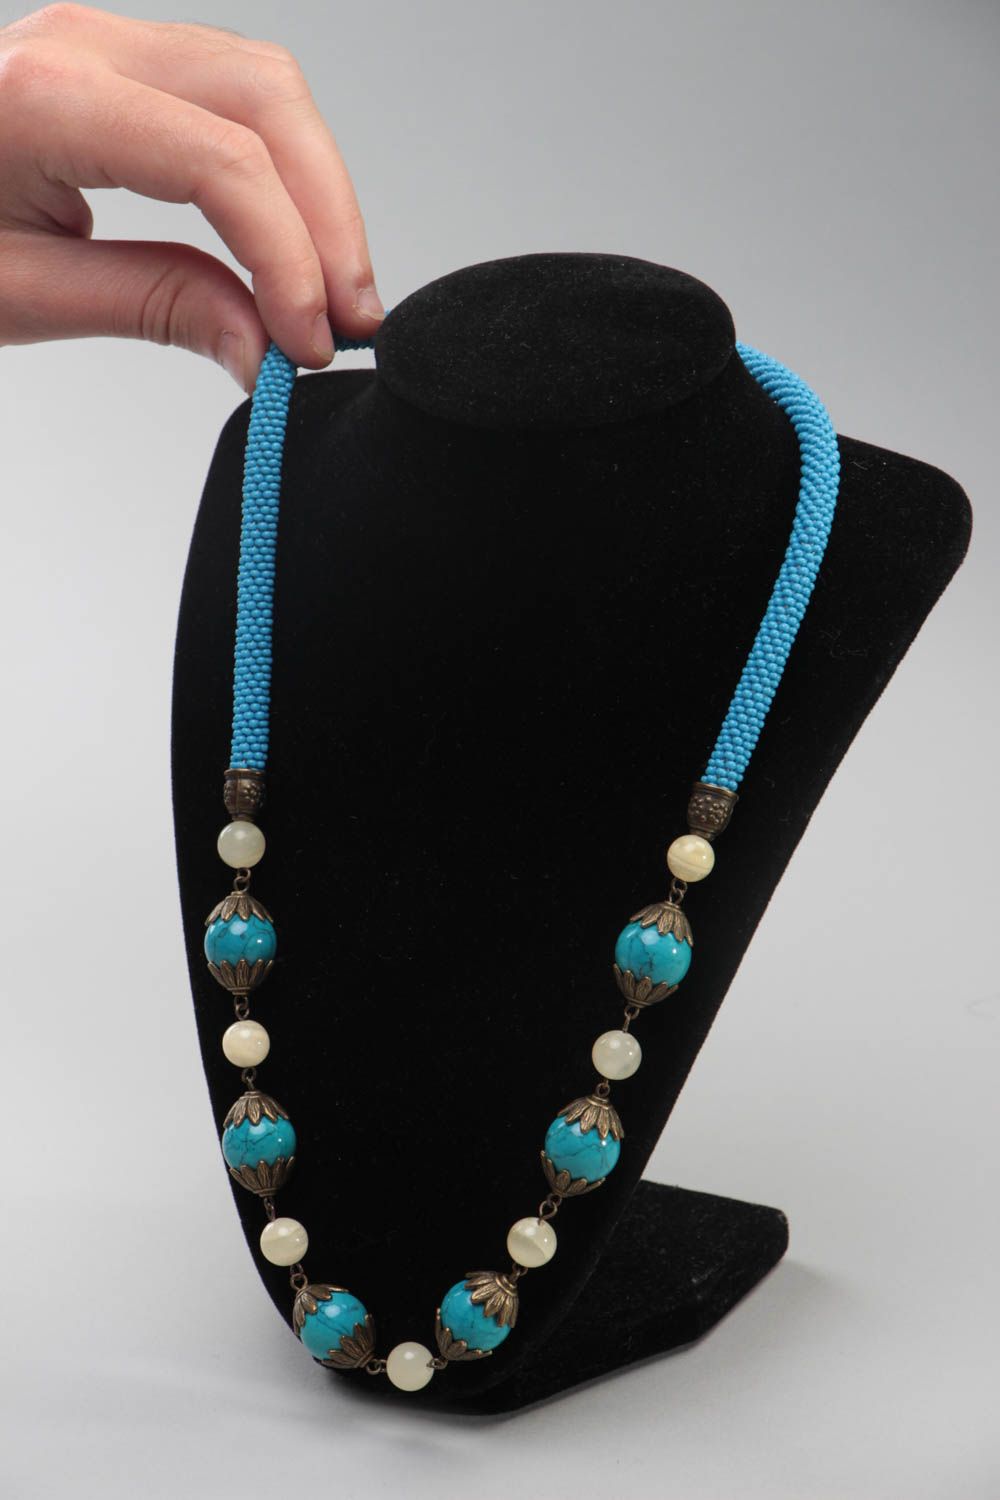 Handmade beaded necklace jewelry made of natural stones blue stylish accessory photo 5